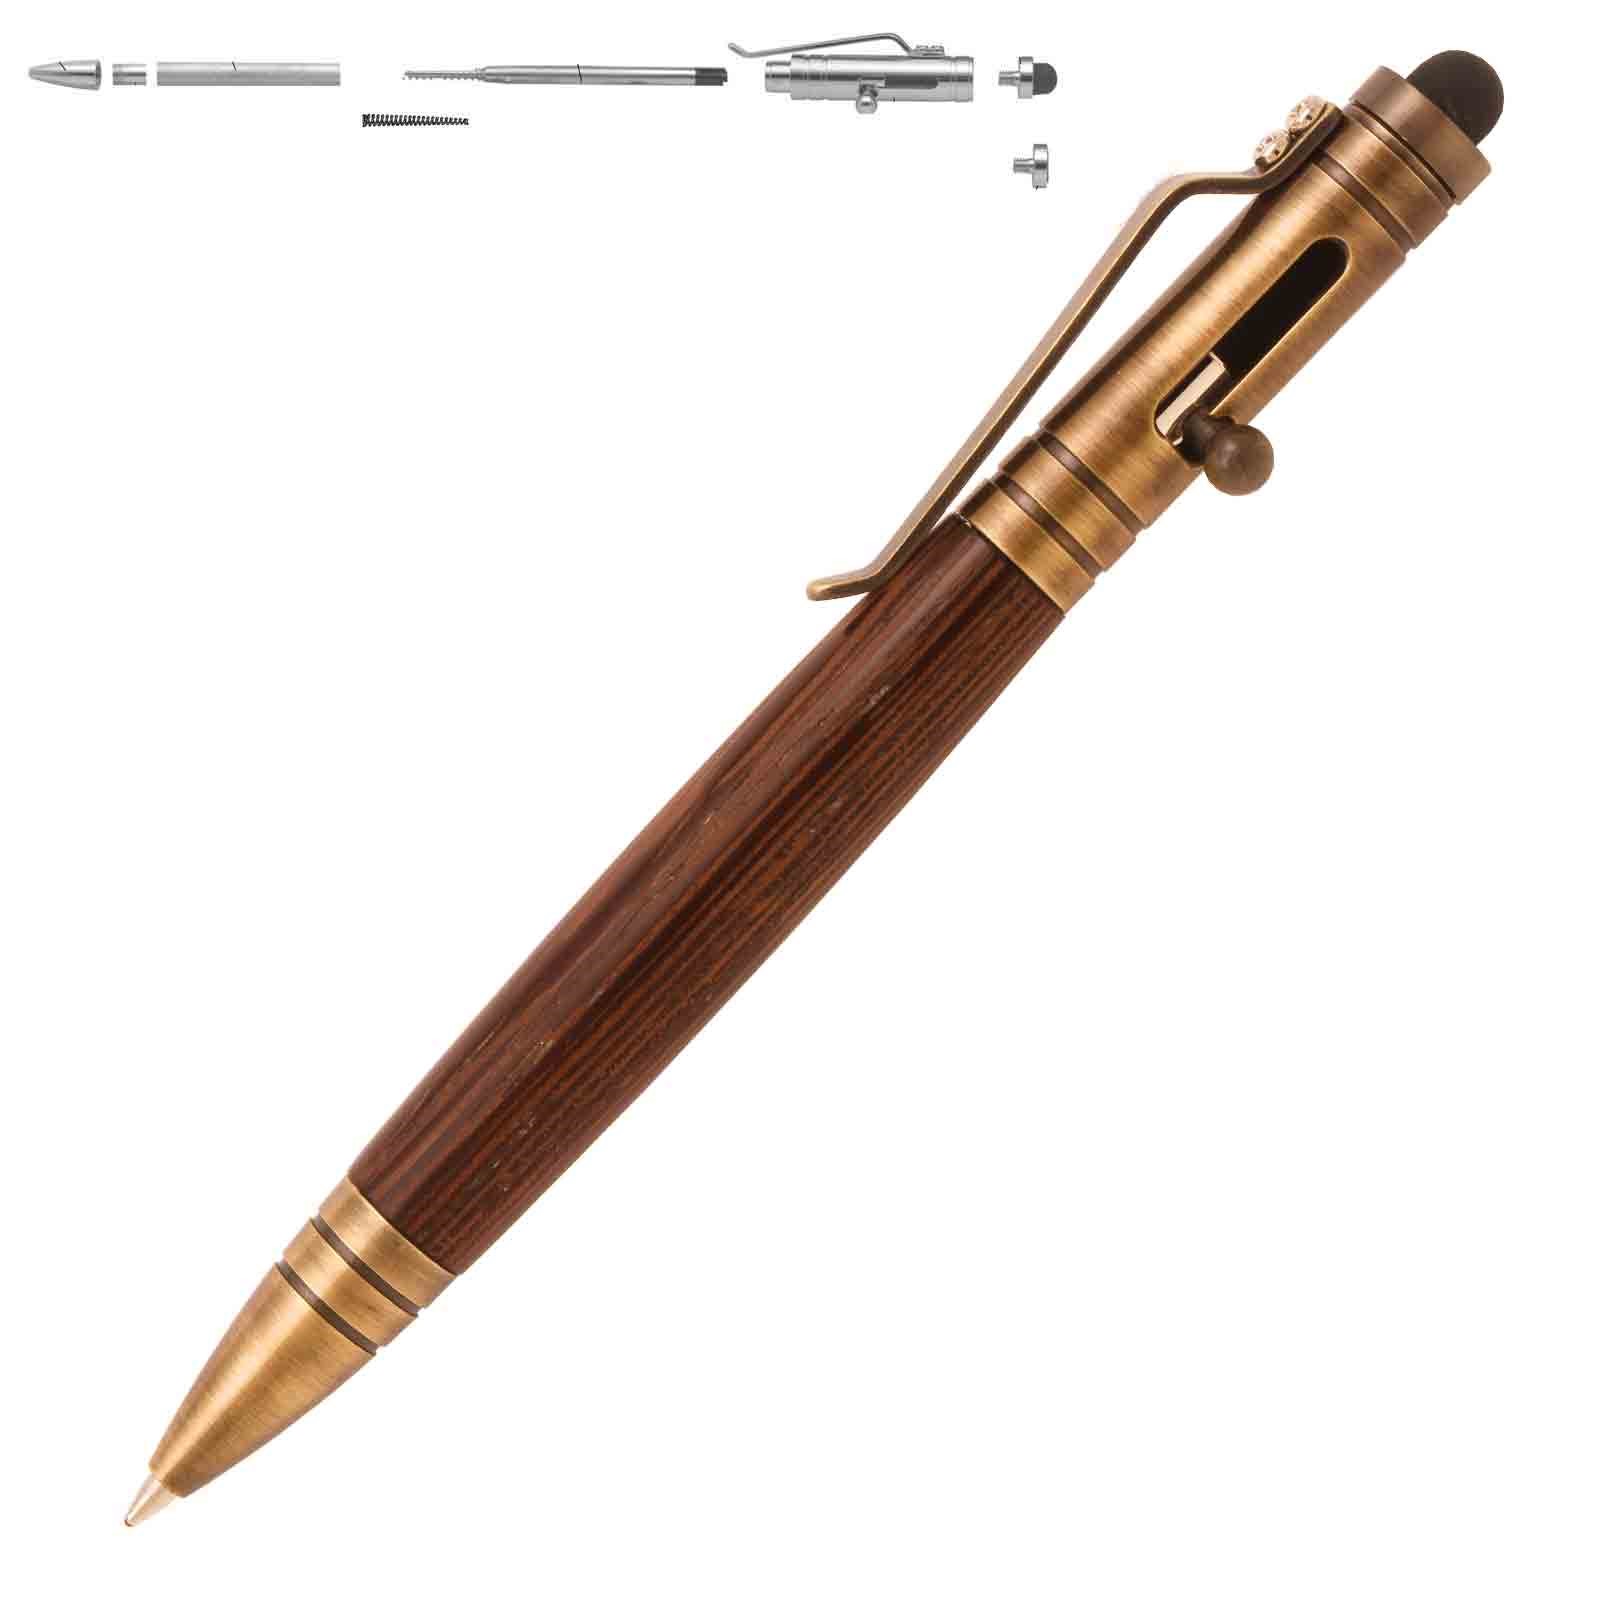 Penn State Industries PKCP 8010 Bolt Action 30 Cal Ballpoint Pen Kit  Woodturning Project (3、クローム)